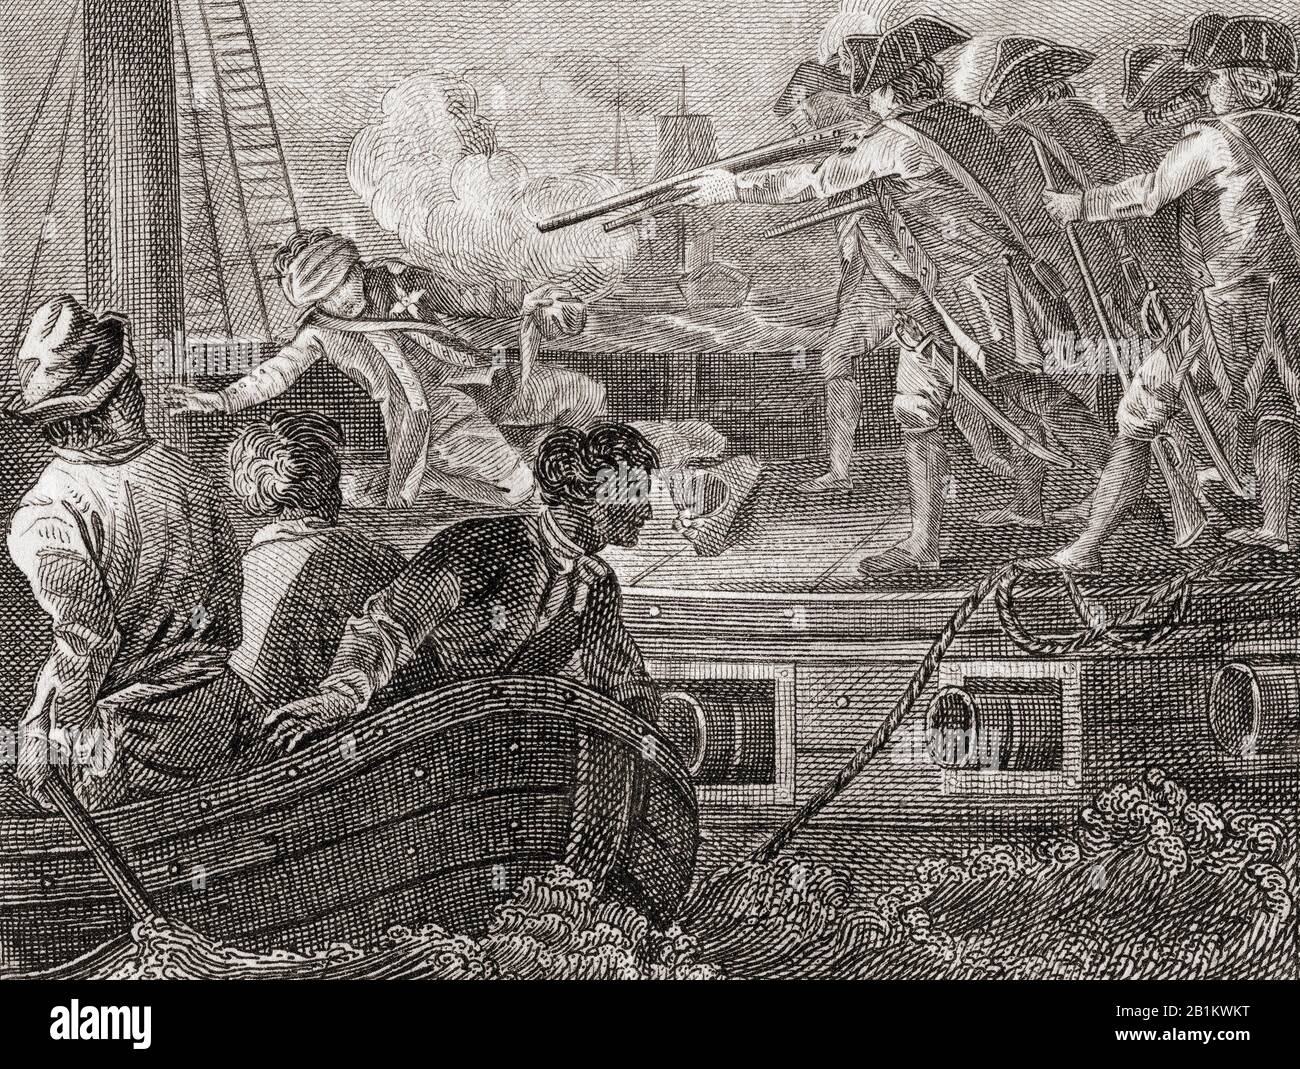 The execution of Admiral Byng.  Admiral John Byng, 1704 – 1757.  Royal Navy officer who was court-martialled and executed by firing squad. From The History of England, from the earliest records to the year 1802, published 1812. Stock Photo